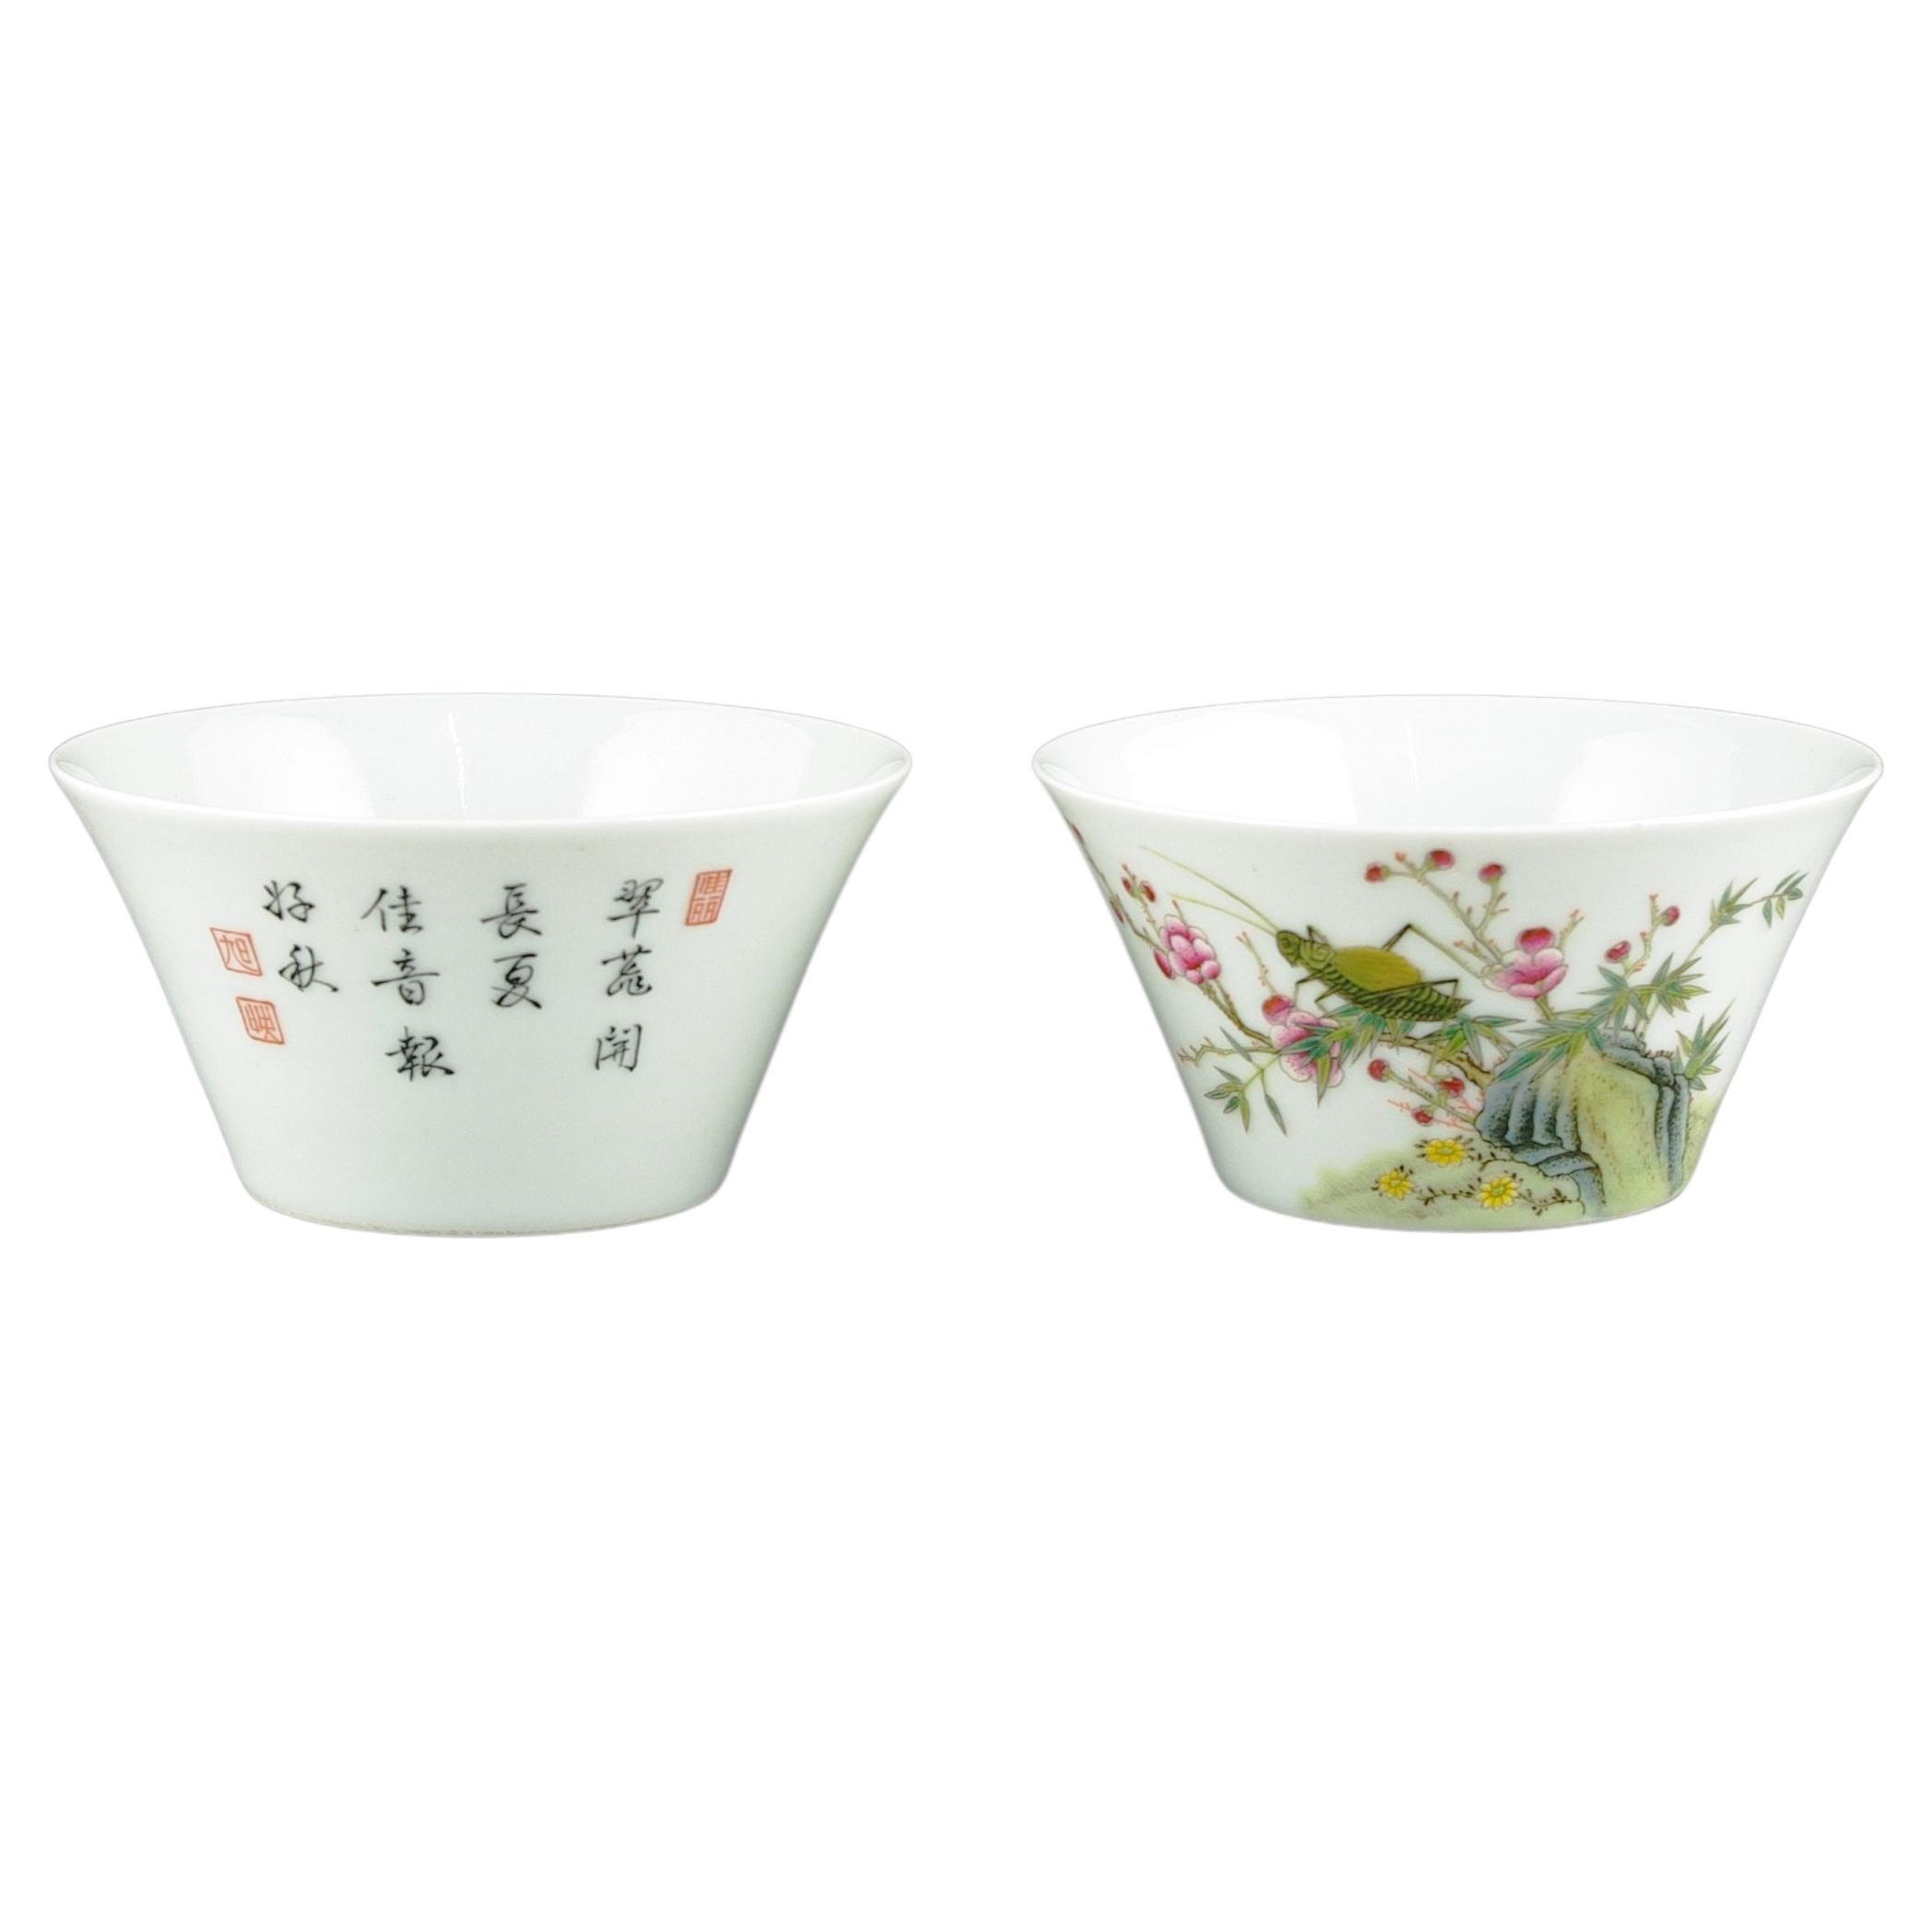 Qing Chinese Porcelain Tea Cups Falangcai Enamel Insects Flowers Shende Tang 19c-20c For Sale